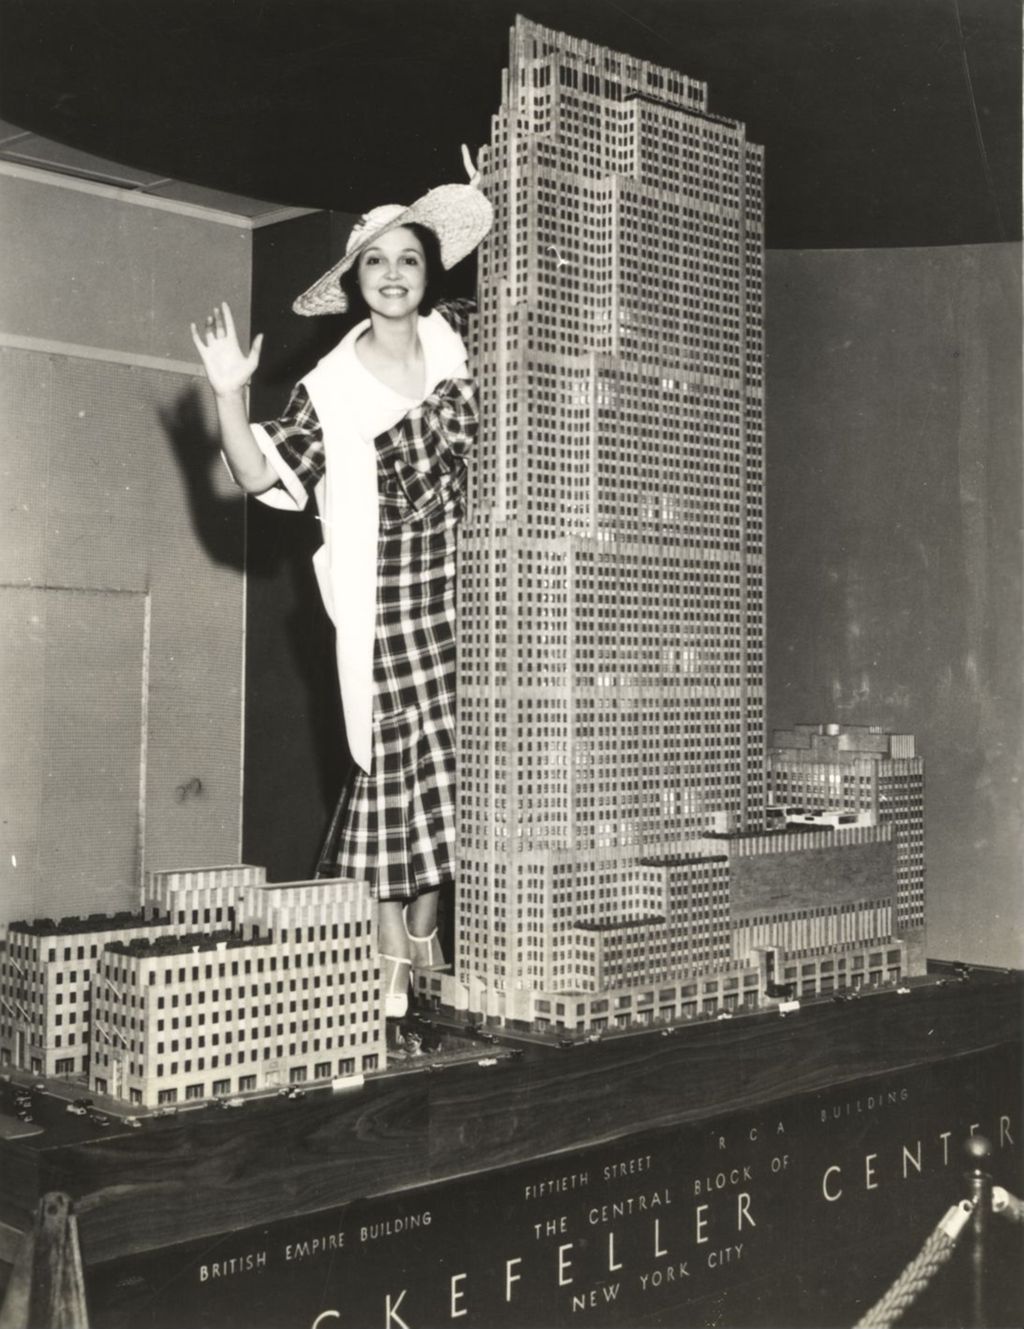 Miniature of NBC radio star waves from the model of the RCA building in Rockefeller Center